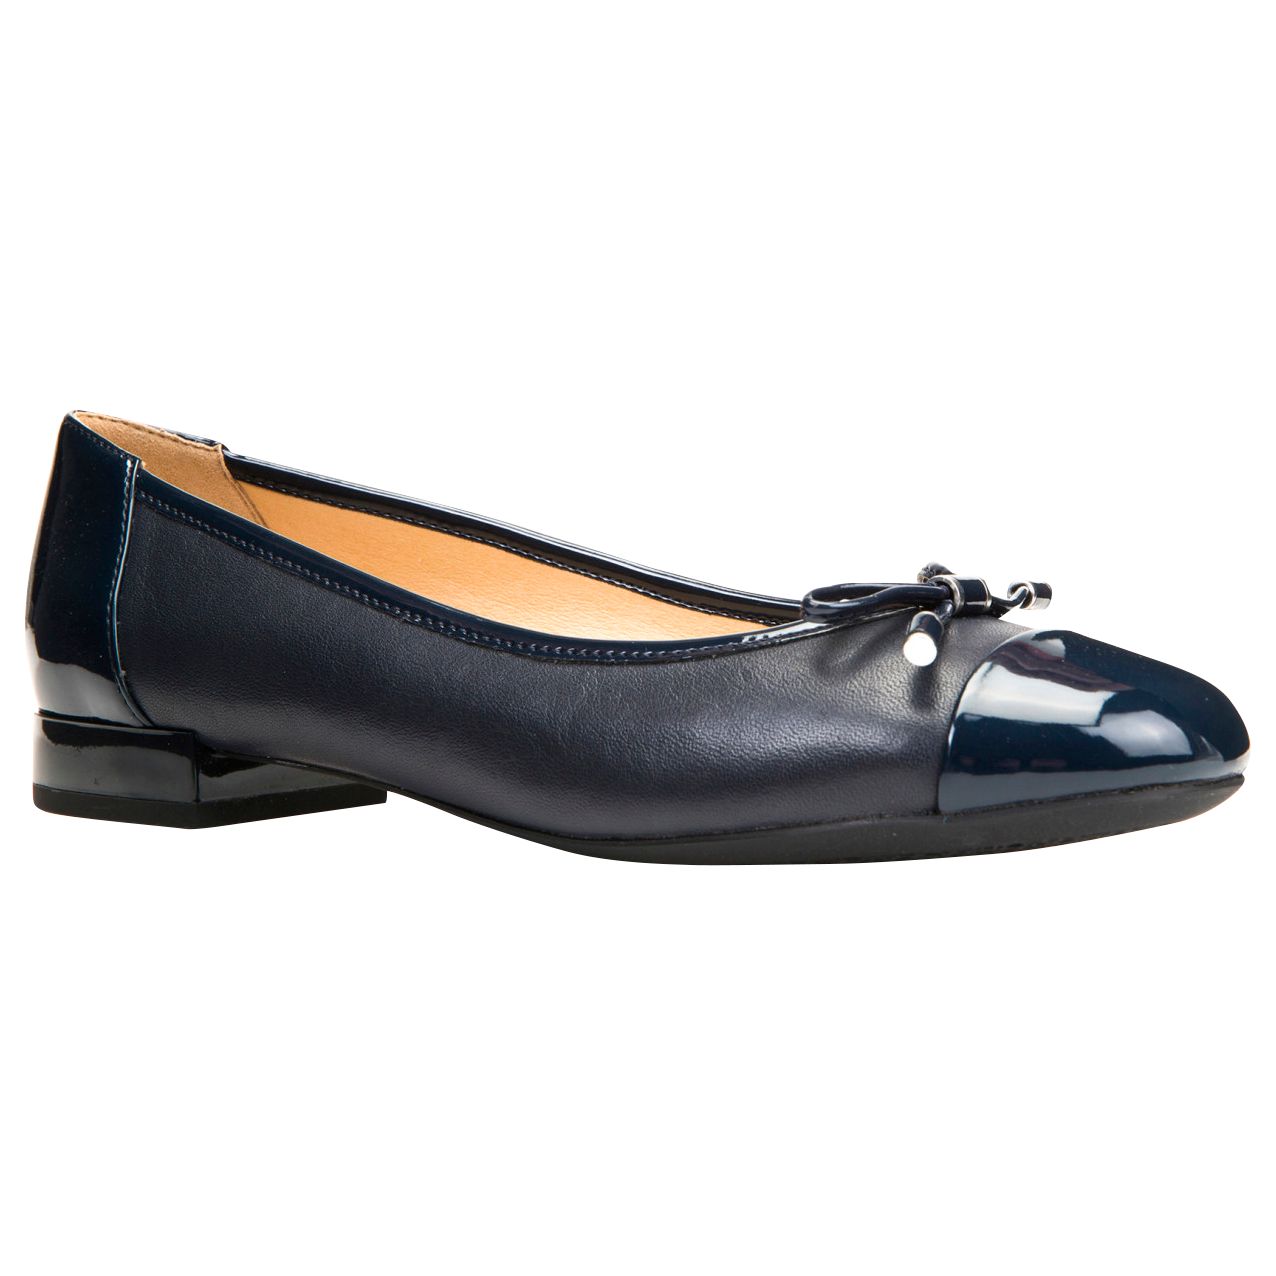 Geox Women's Wistrey Breathable Ballet Pumps, Navy Leather, 4